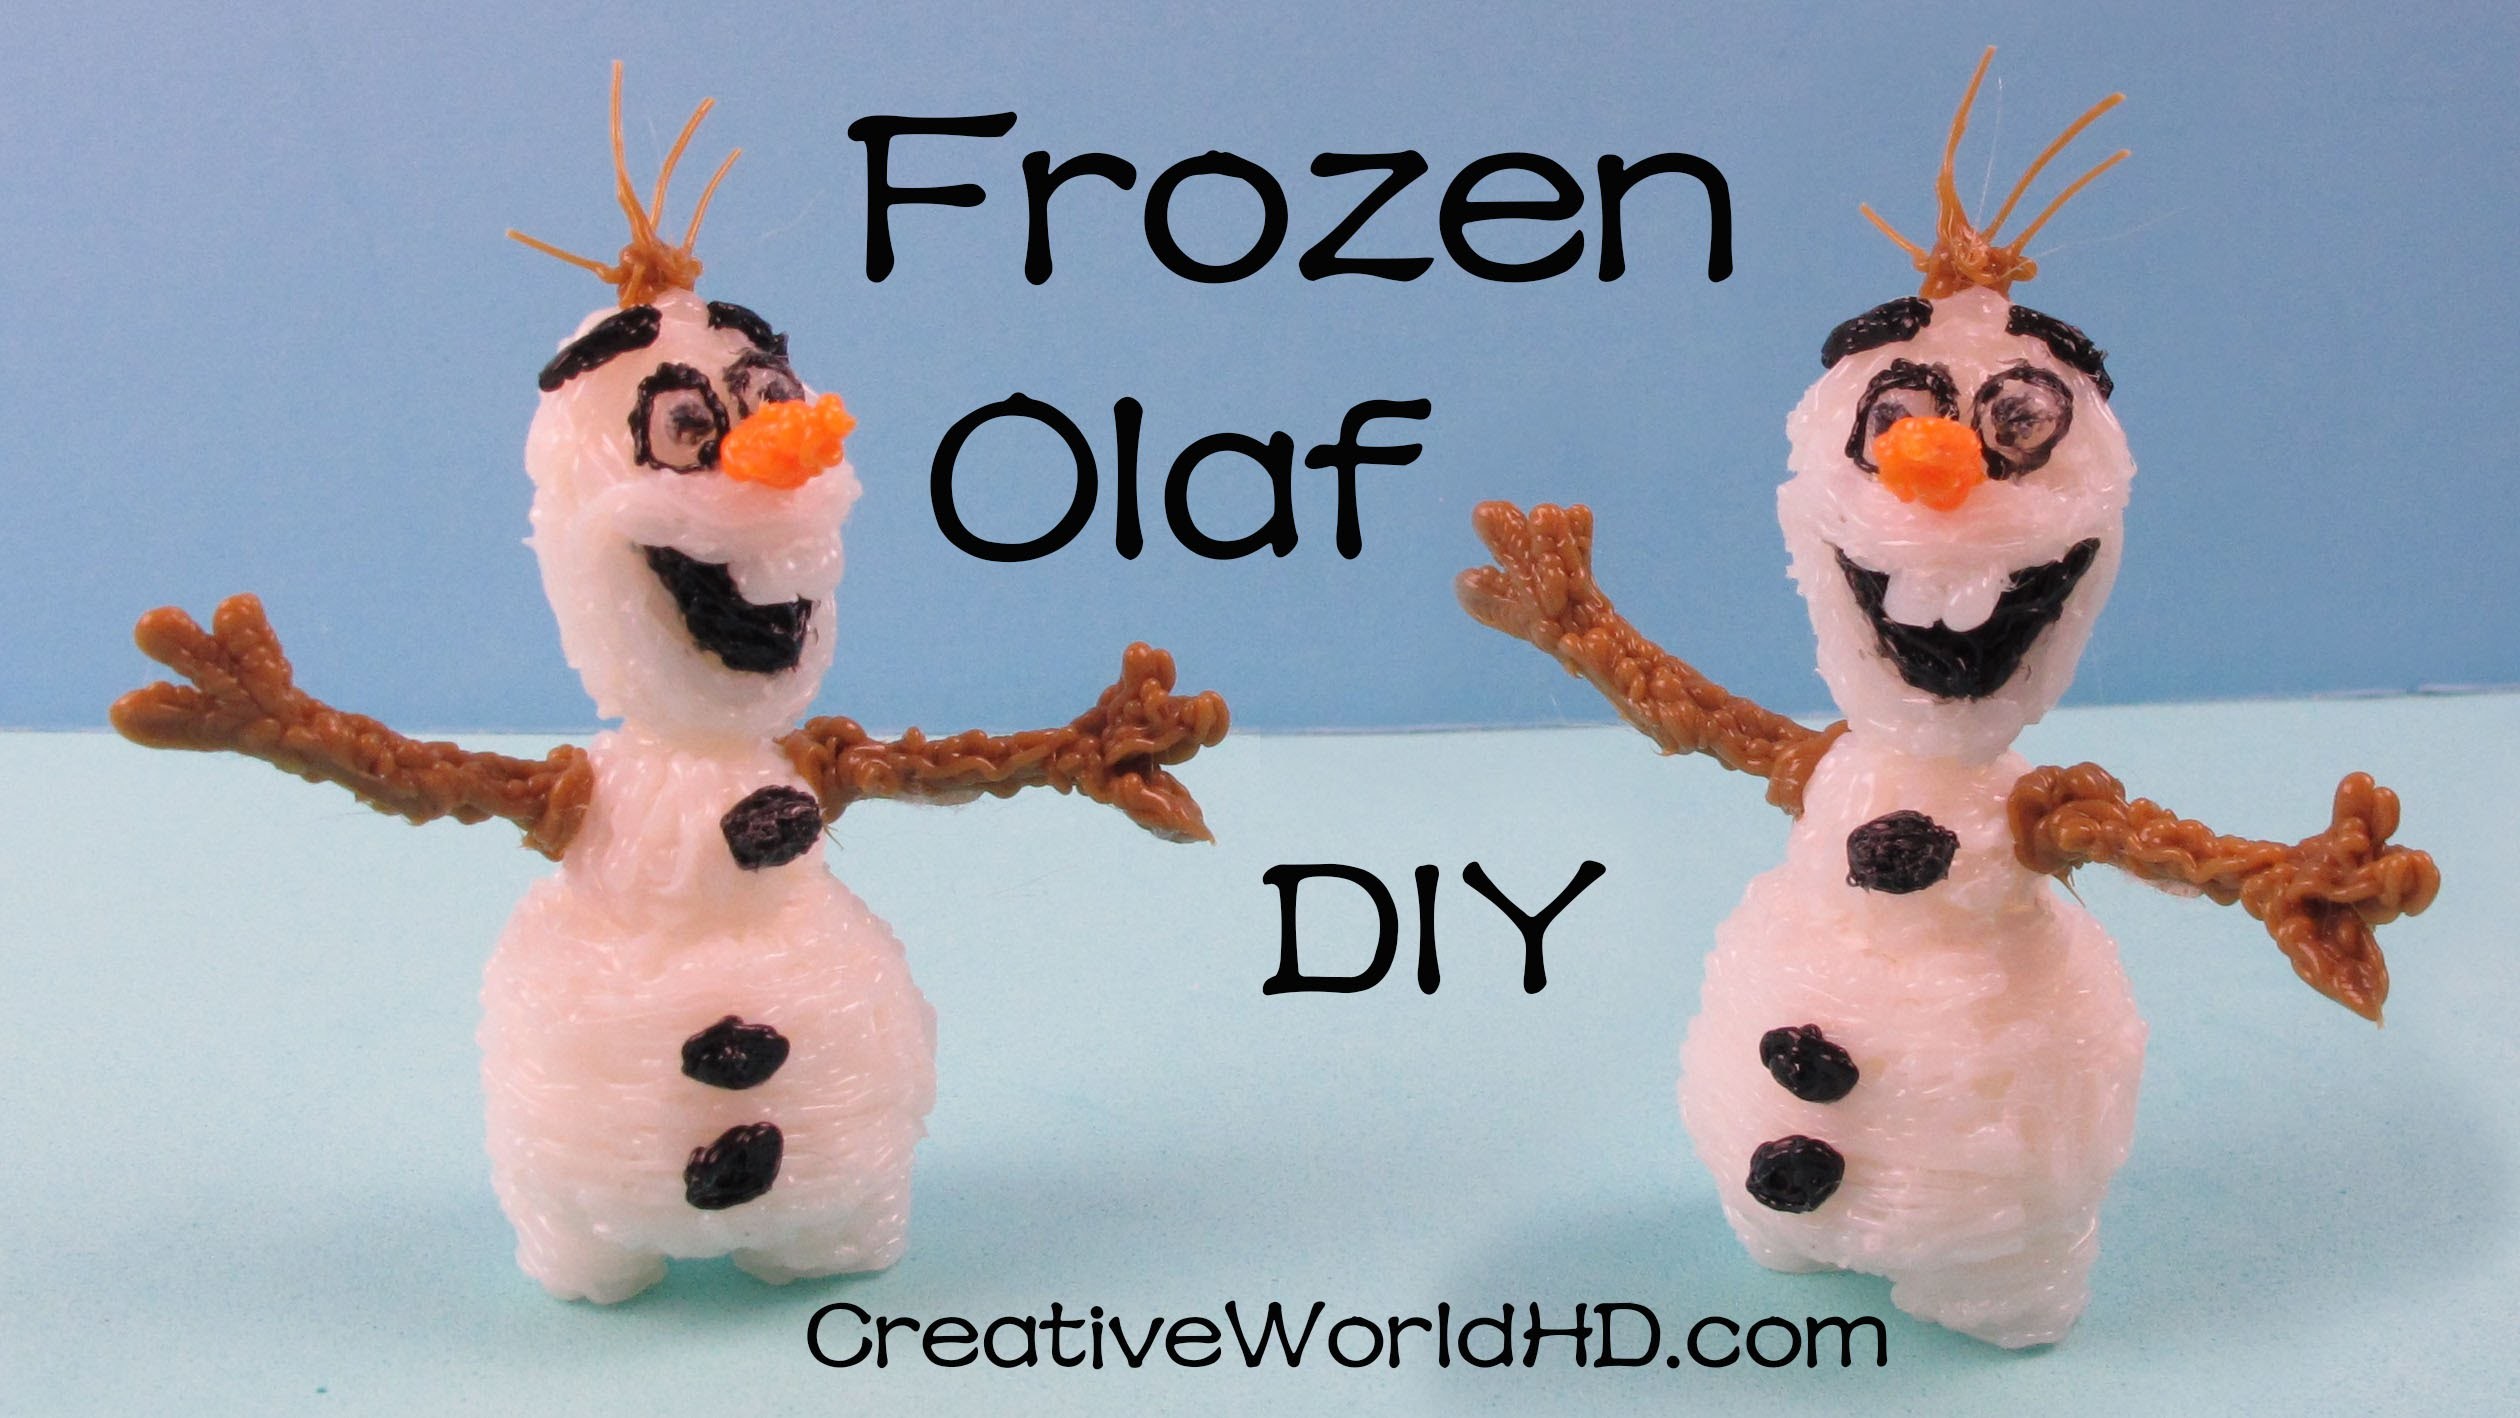 How to Make Snowman Frozen Olaf Figurine - 3D Printing Pen Creations DIY Tutorial by Creative World